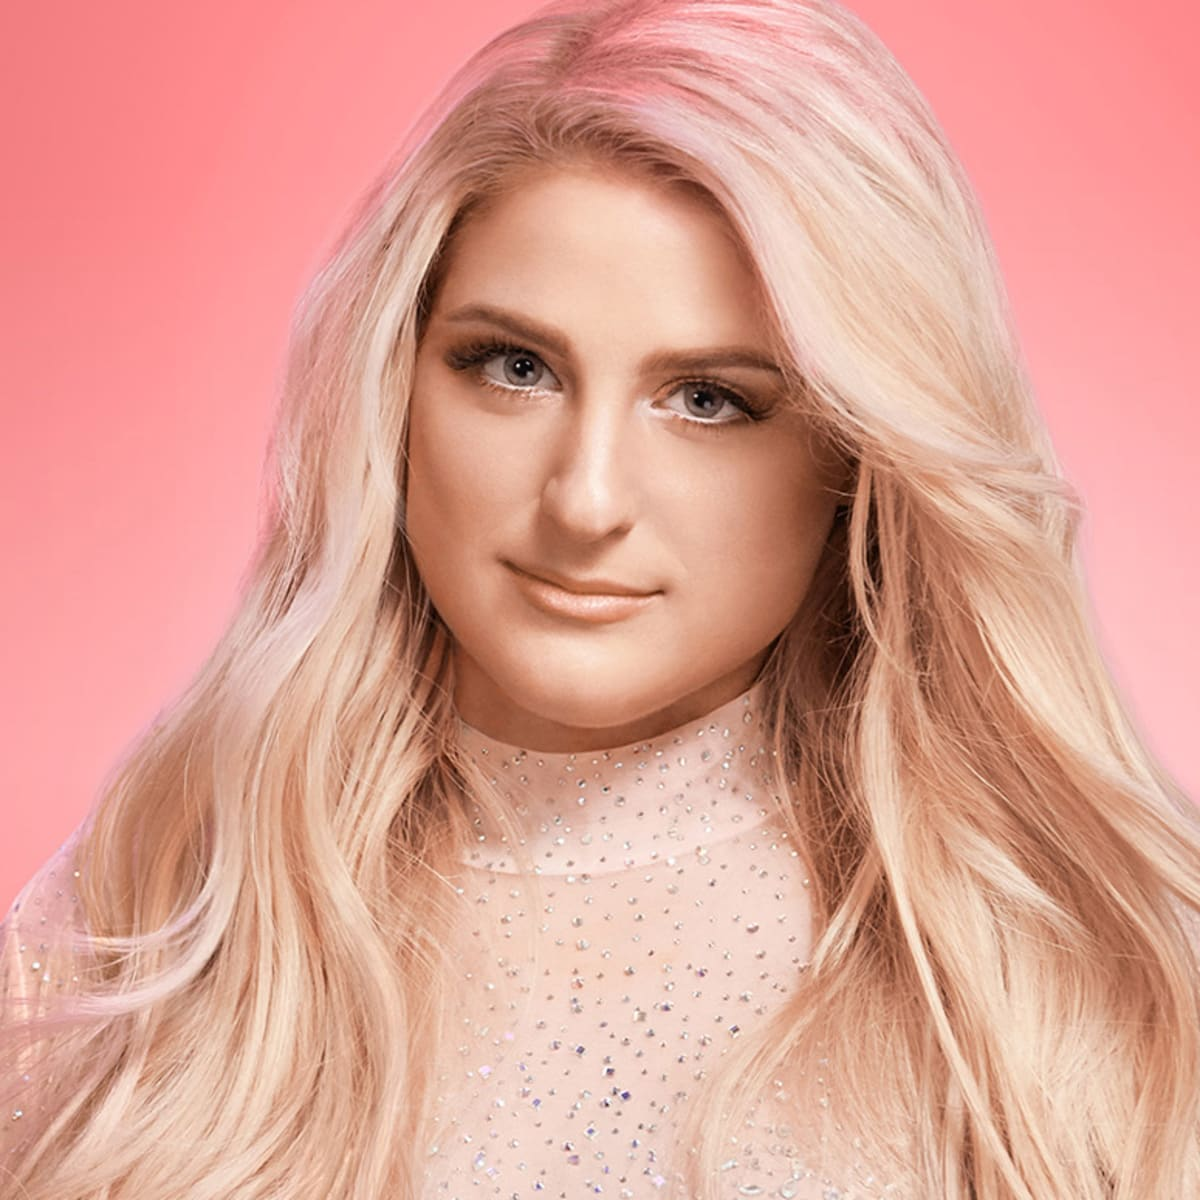 Meghan Trainor releases Made You Look